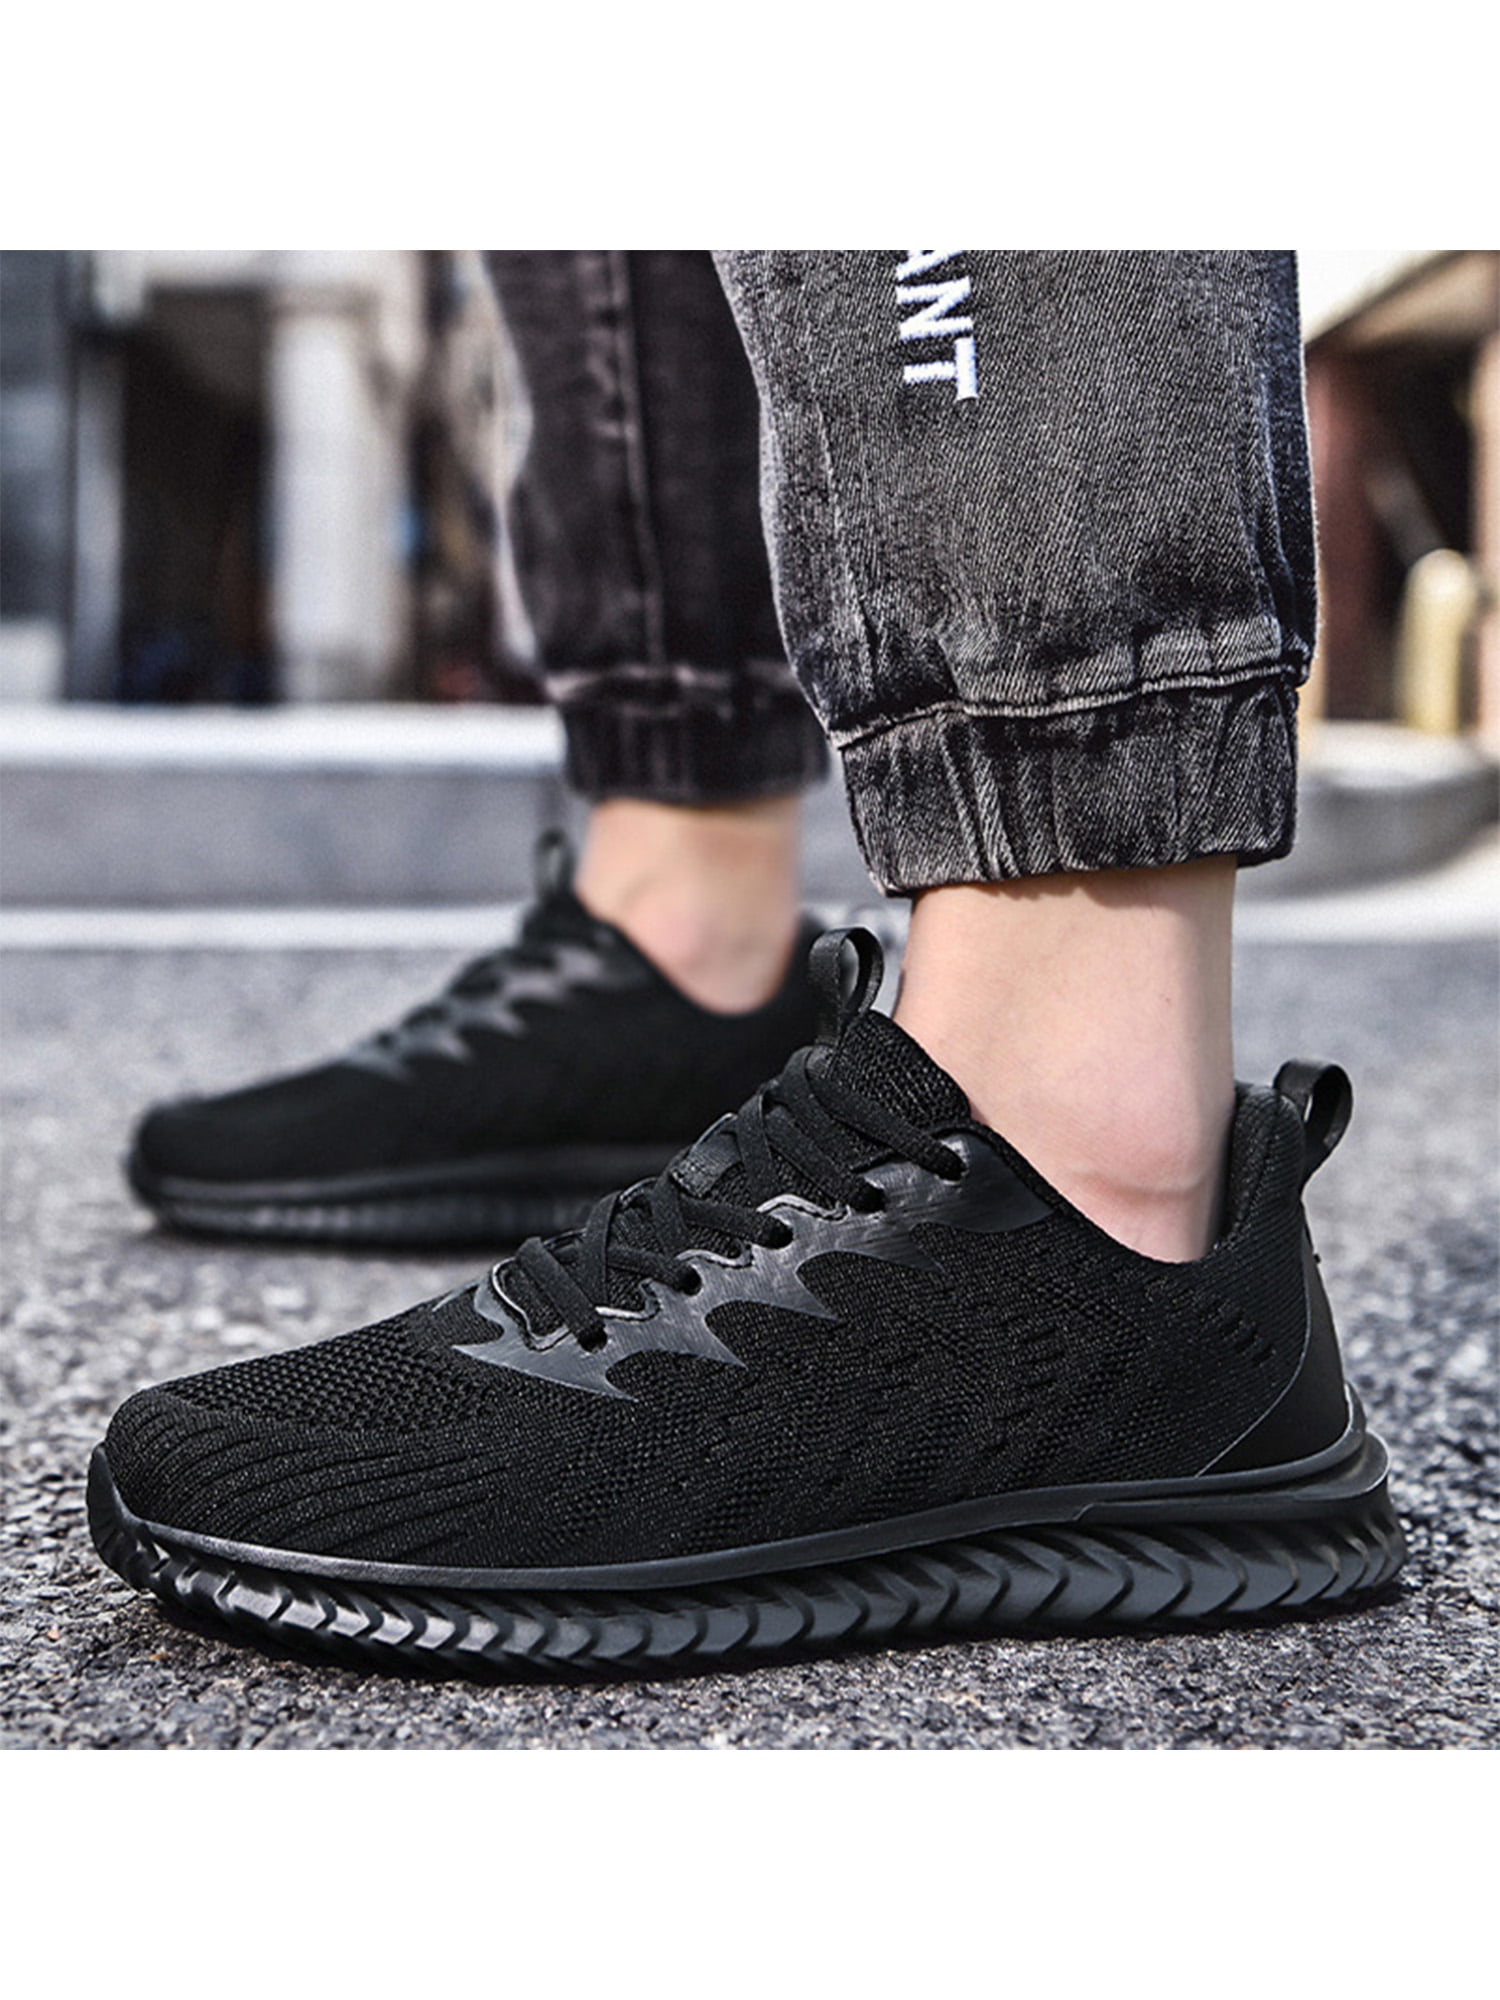 Mens Slip On Mesh Sneakers Trainer Breathable Walking Sports Casual Mesh Shoes 